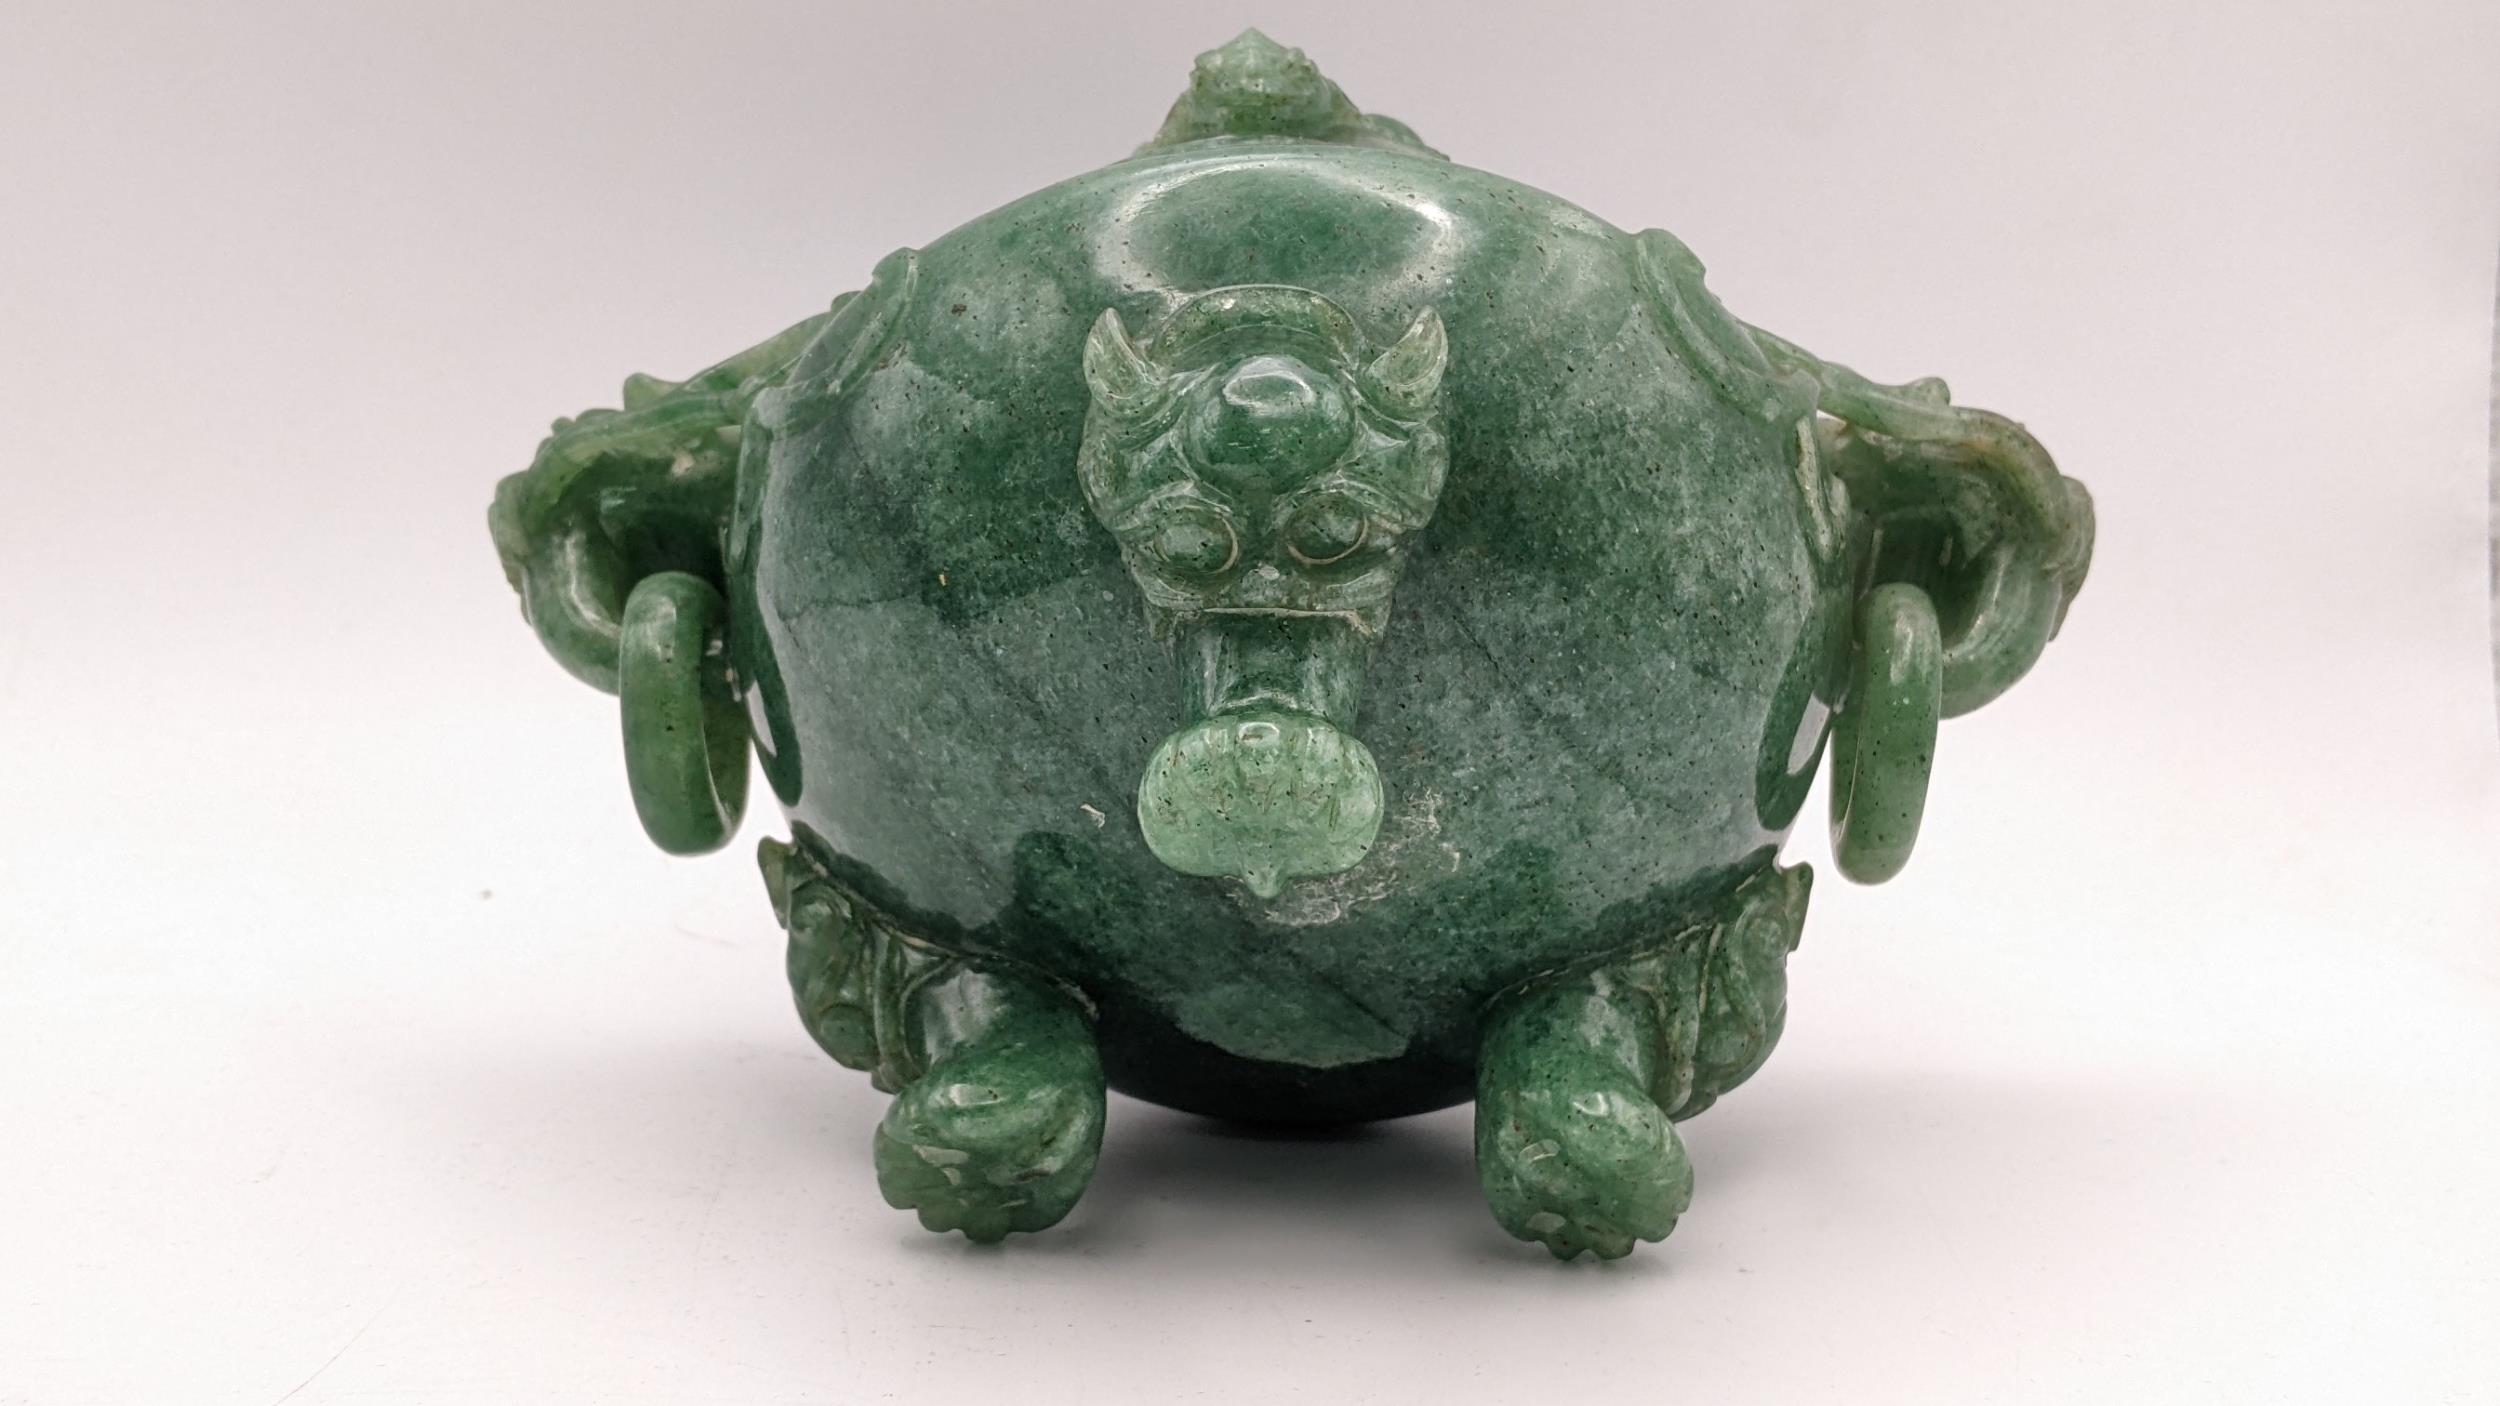 A 20th century Chinese jade censor, the lid decorated with a coiled dragon - Image 5 of 5